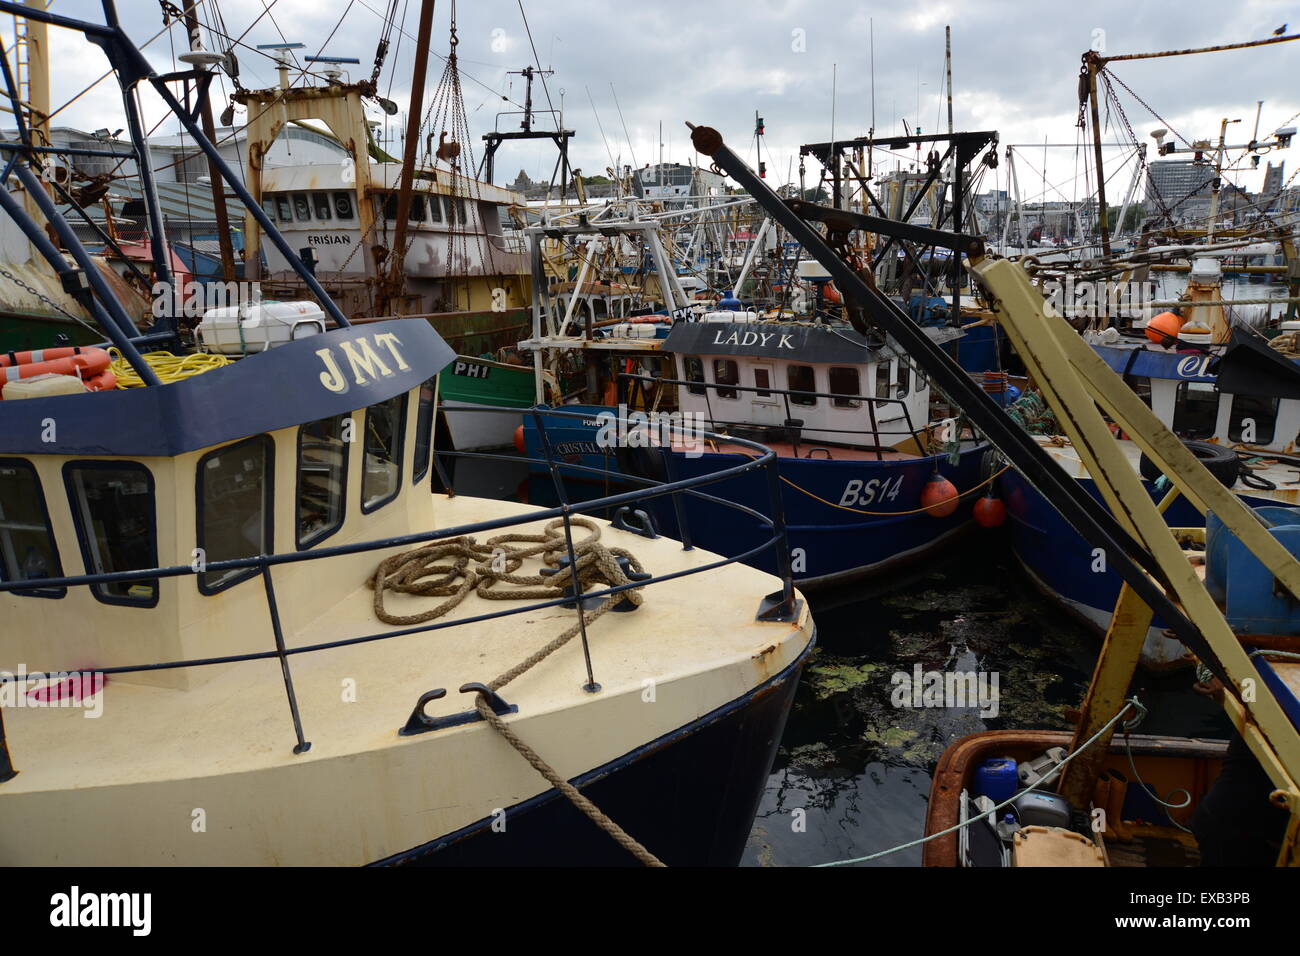 Fishing vessels moored in Sutton Harbour Plymouth including Sunk Scalloper JMT Stock Photo